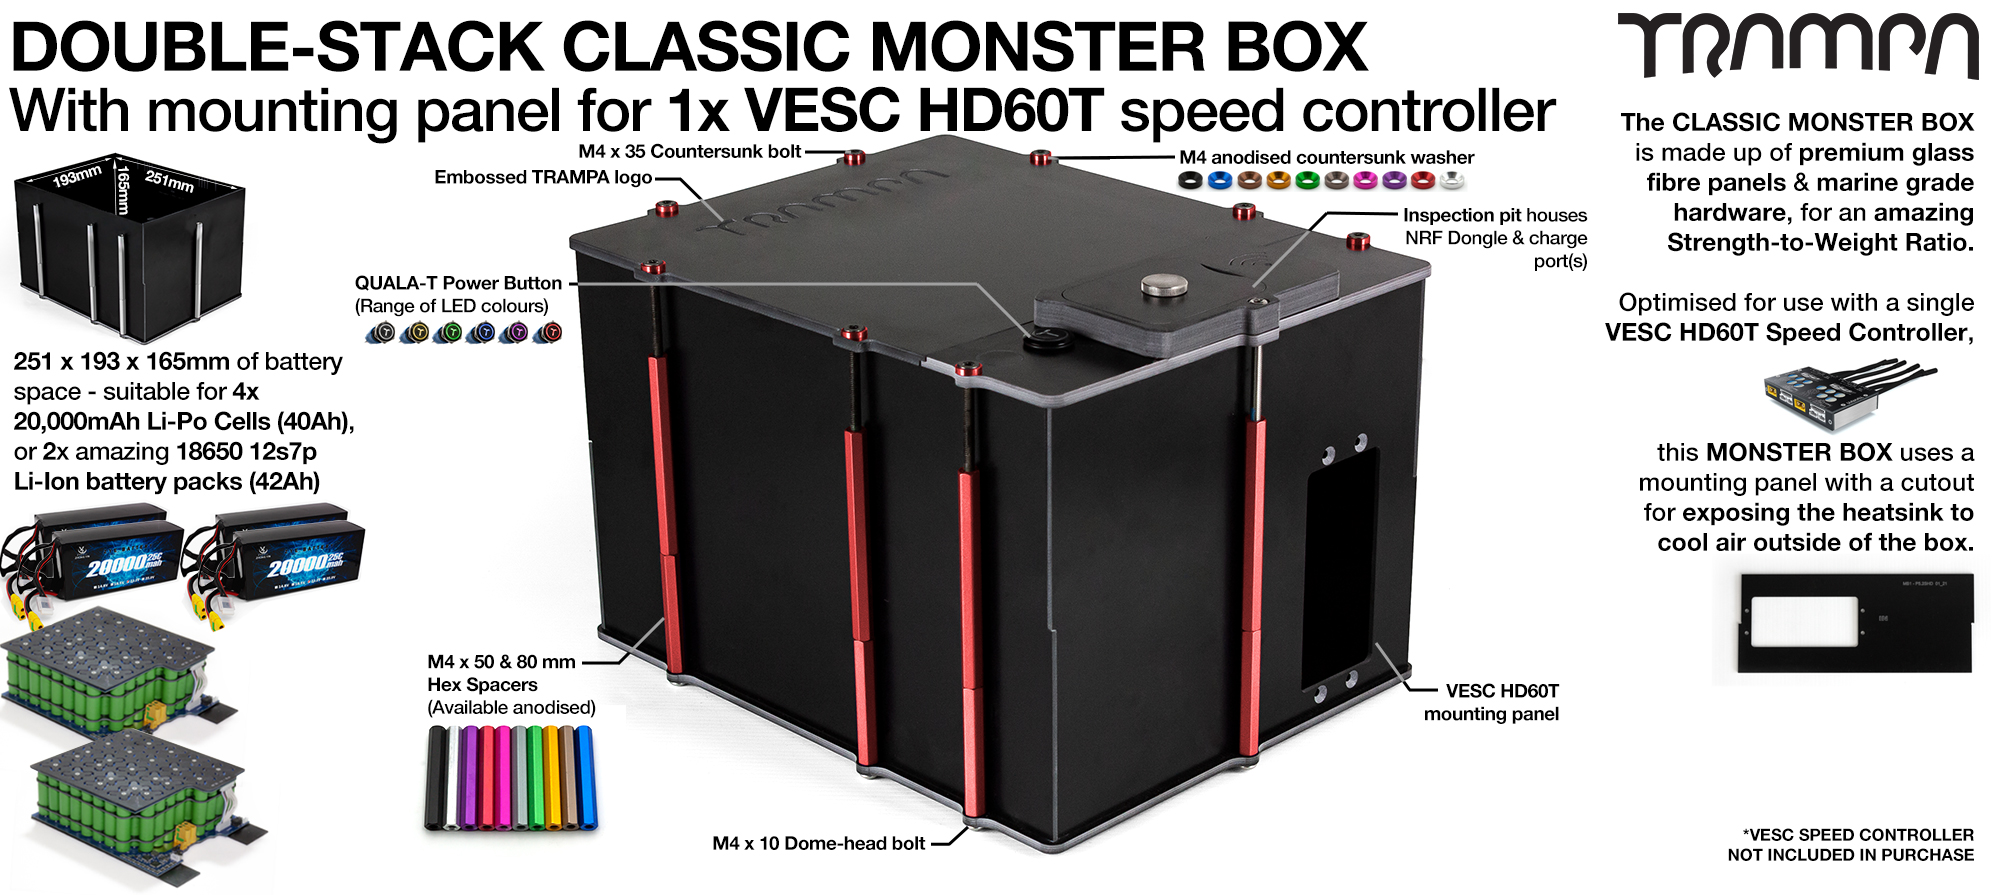 Classic MONSTER Box MkV DOUBLE STACKER fits 168x 18650 cells to give 42Ah Range or 2x 22000Ah Li-Po cells to give 44Ah Range & has Panels to fit 1x VESC HD-60T internally. 